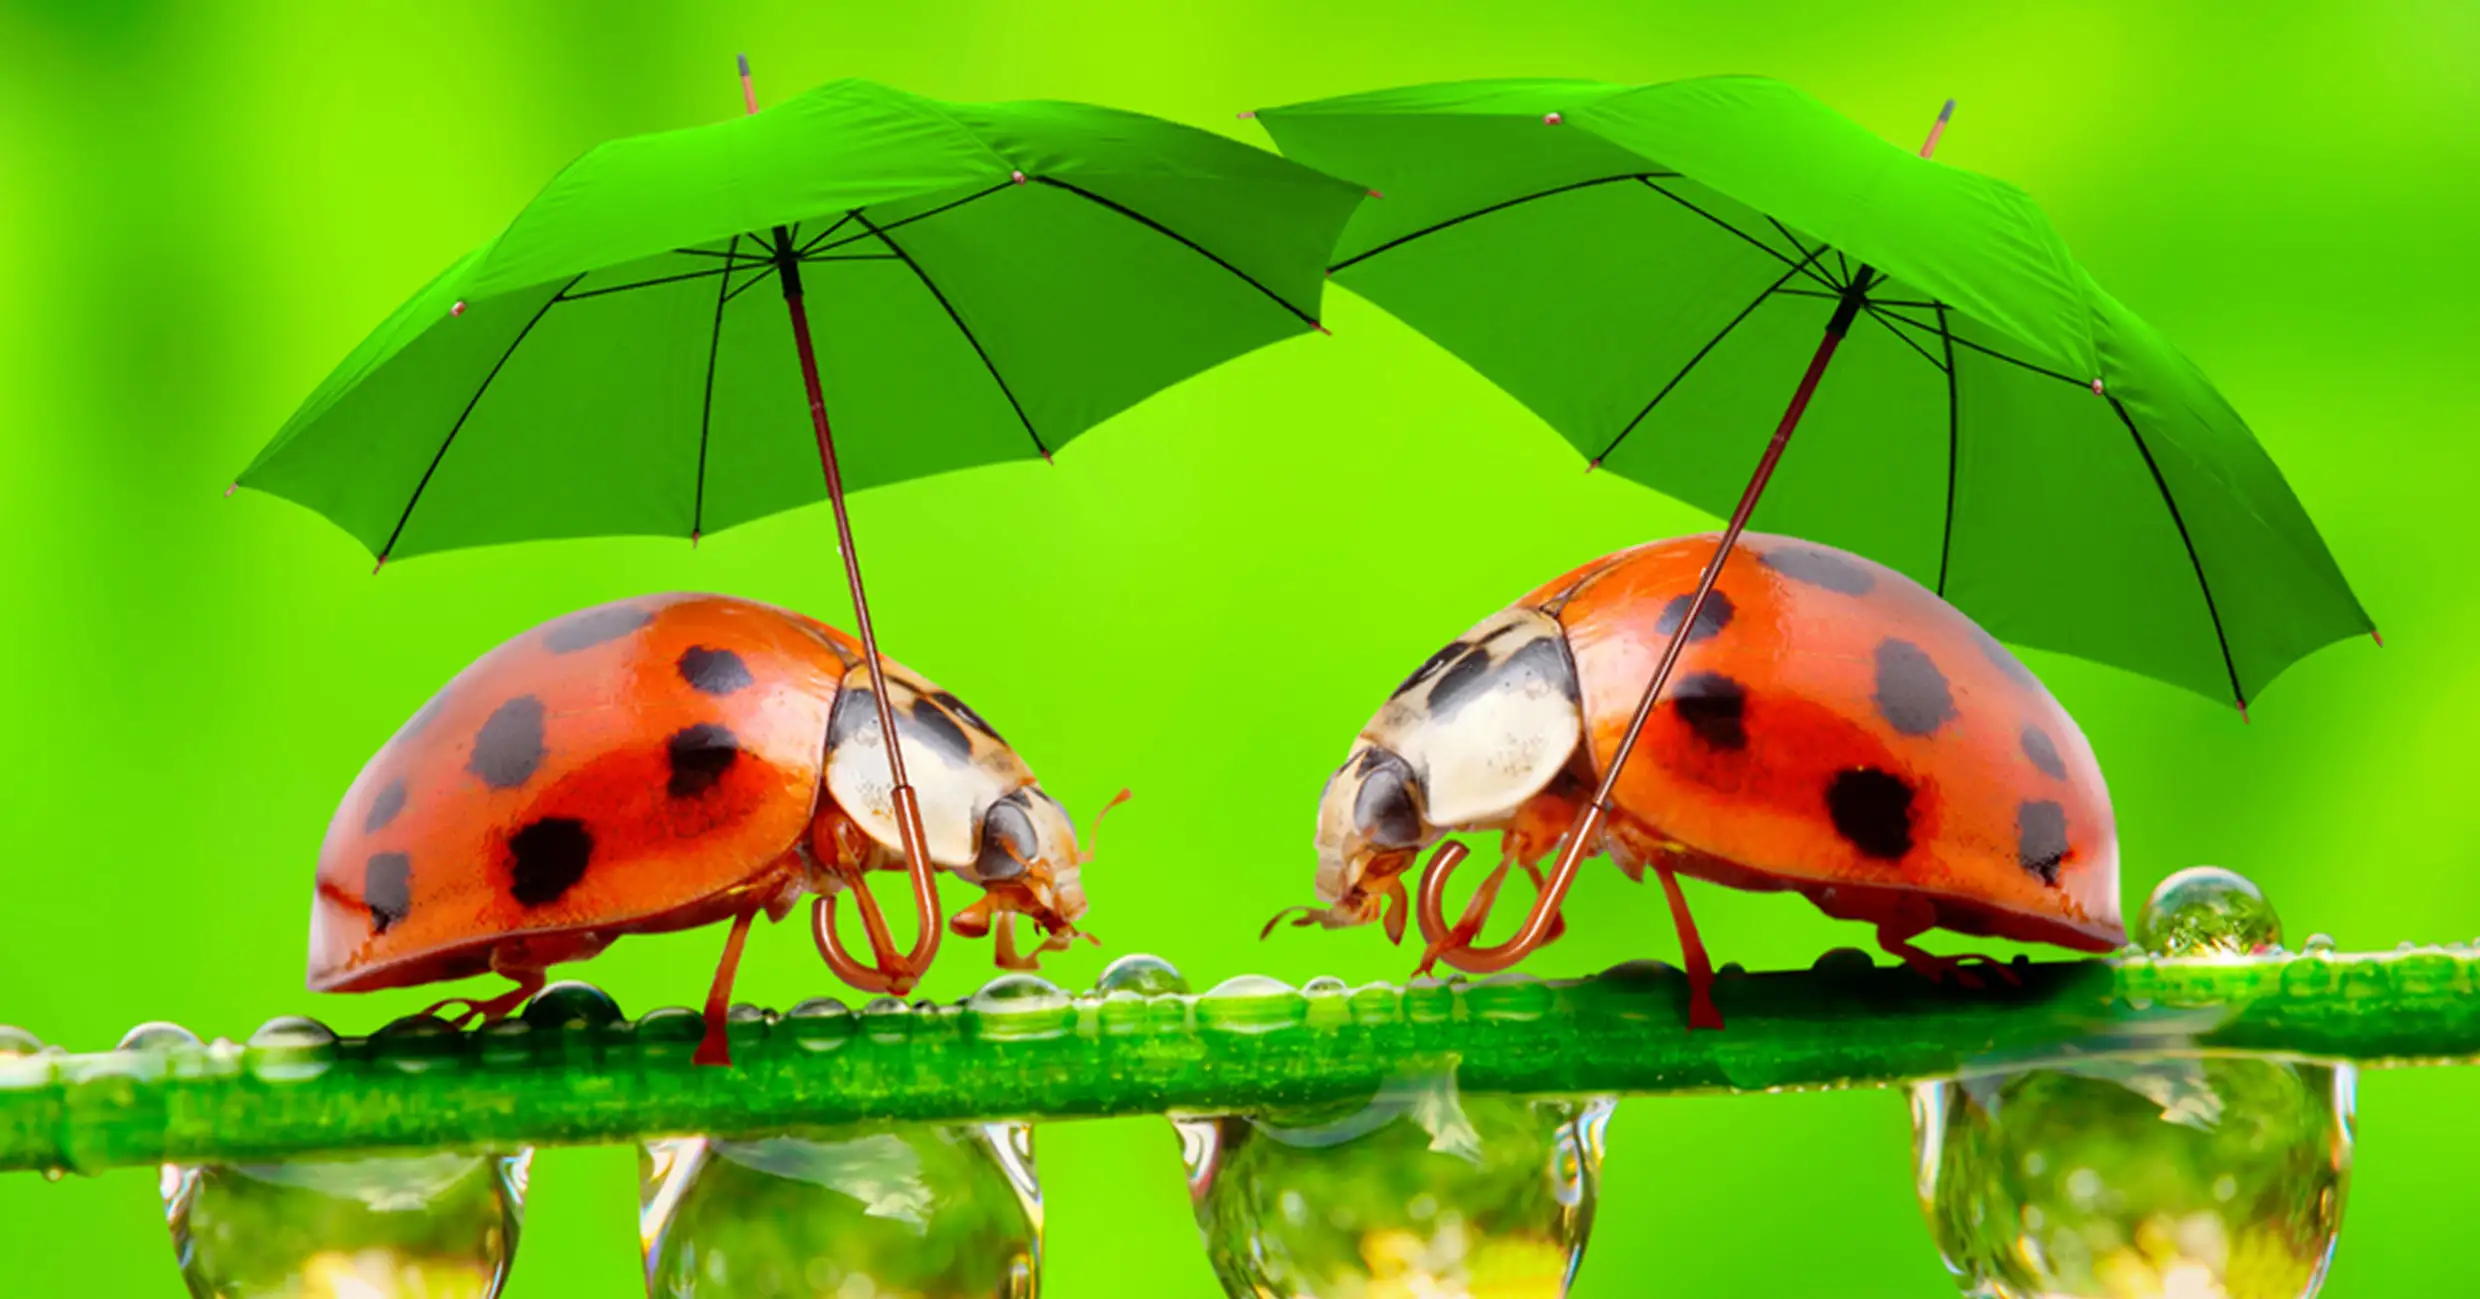 Two lady bugs crawling along a blade of grass - keep pests away from your home with Arrow Exterminating Company in NY